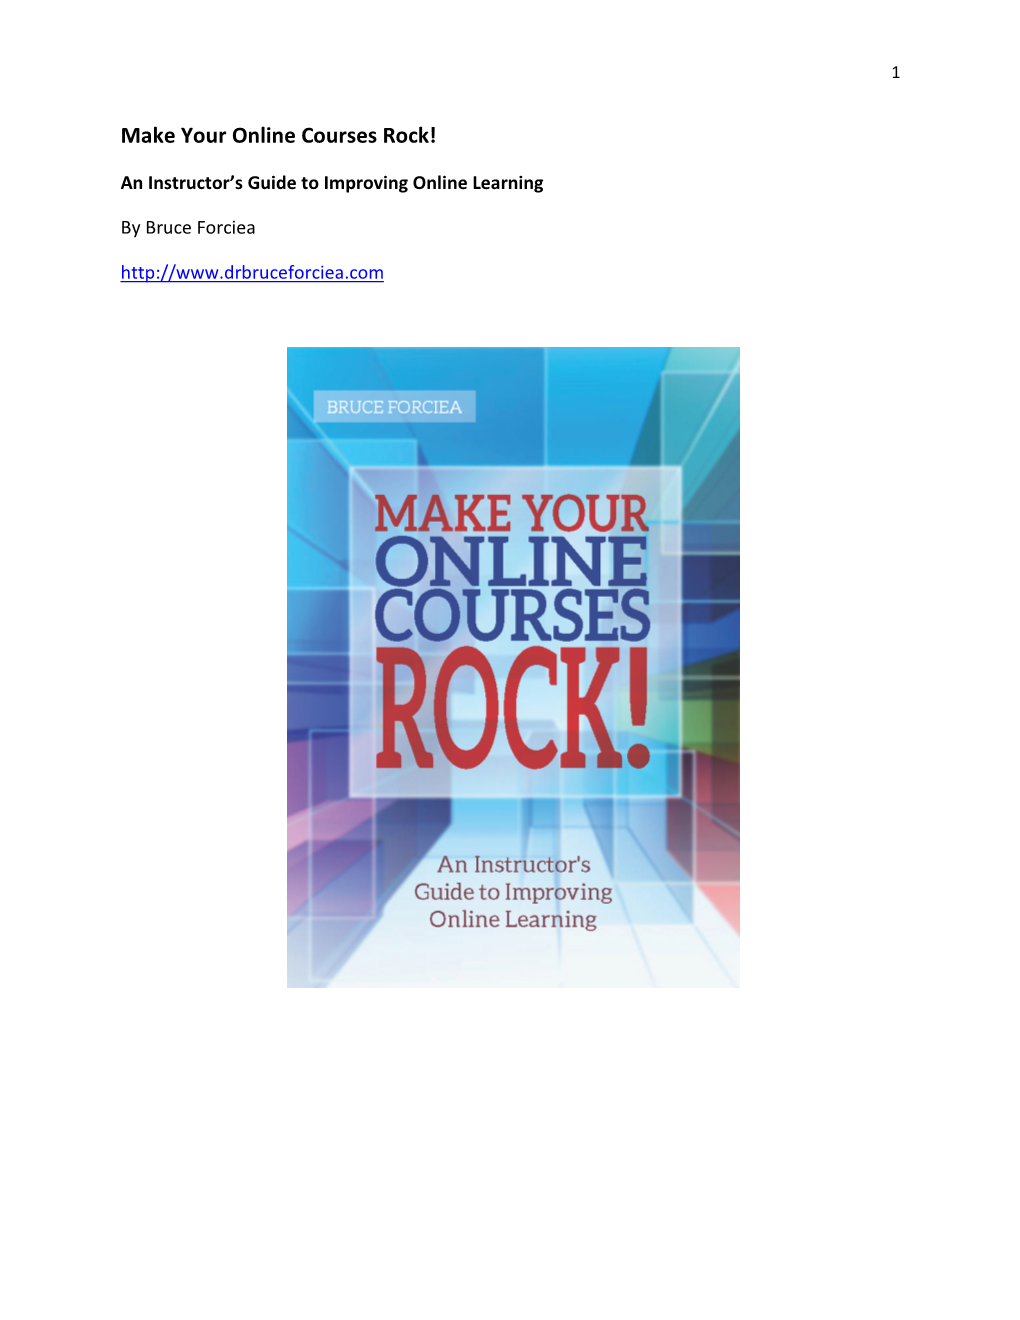 Make Your Online Courses Rock!